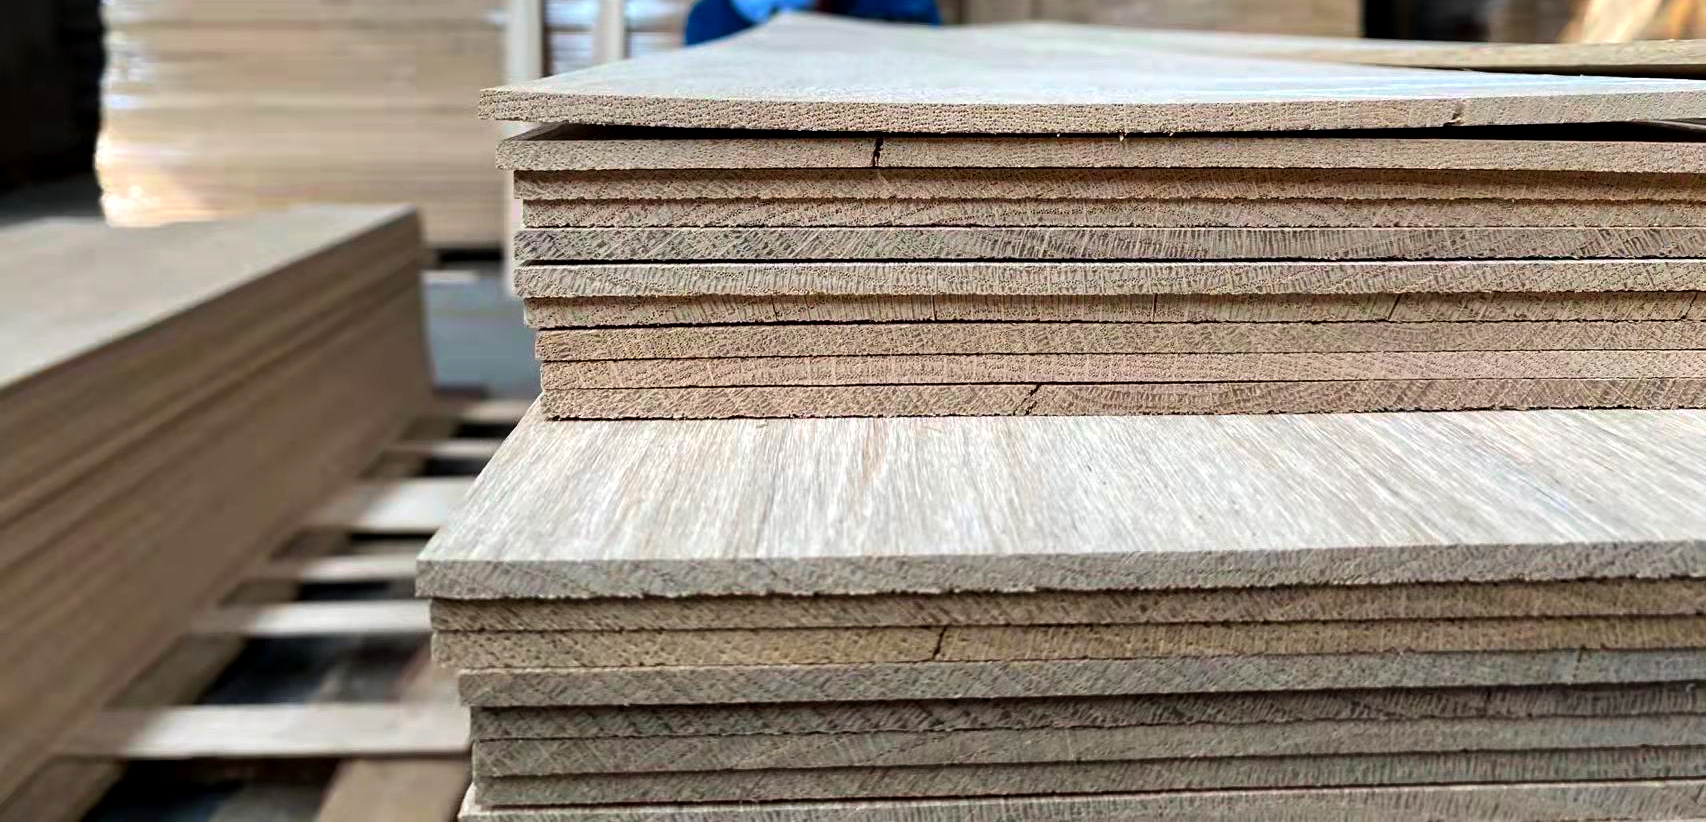 Wear layer or veneer of European oak with thickness of 6mm.